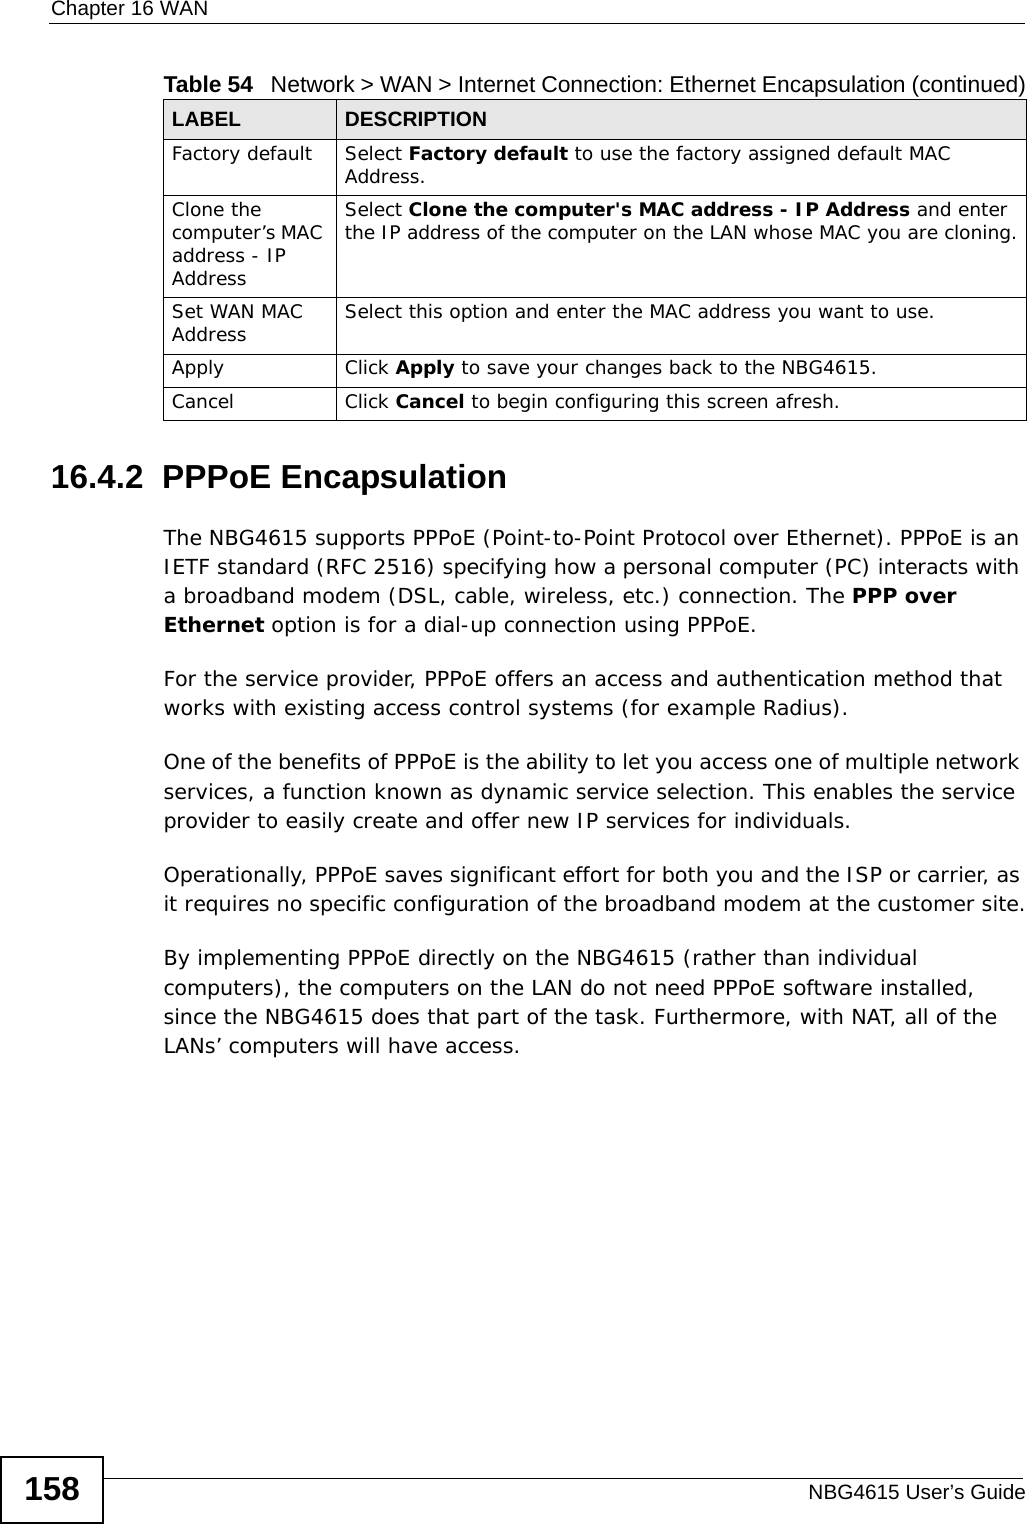 Chapter 16 WANNBG4615 User’s Guide15816.4.2  PPPoE EncapsulationThe NBG4615 supports PPPoE (Point-to-Point Protocol over Ethernet). PPPoE is an IETF standard (RFC 2516) specifying how a personal computer (PC) interacts with a broadband modem (DSL, cable, wireless, etc.) connection. The PPP over Ethernet option is for a dial-up connection using PPPoE.For the service provider, PPPoE offers an access and authentication method that works with existing access control systems (for example Radius).One of the benefits of PPPoE is the ability to let you access one of multiple network services, a function known as dynamic service selection. This enables the service provider to easily create and offer new IP services for individuals.Operationally, PPPoE saves significant effort for both you and the ISP or carrier, as it requires no specific configuration of the broadband modem at the customer site.By implementing PPPoE directly on the NBG4615 (rather than individual computers), the computers on the LAN do not need PPPoE software installed, since the NBG4615 does that part of the task. Furthermore, with NAT, all of the LANs’ computers will have access.Factory default Select Factory default to use the factory assigned default MAC Address.Clone the computer’s MAC address - IP AddressSelect Clone the computer&apos;s MAC address - IP Address and enter the IP address of the computer on the LAN whose MAC you are cloning.Set WAN MAC Address Select this option and enter the MAC address you want to use.Apply Click Apply to save your changes back to the NBG4615.Cancel Click Cancel to begin configuring this screen afresh.Table 54   Network &gt; WAN &gt; Internet Connection: Ethernet Encapsulation (continued)LABEL DESCRIPTION